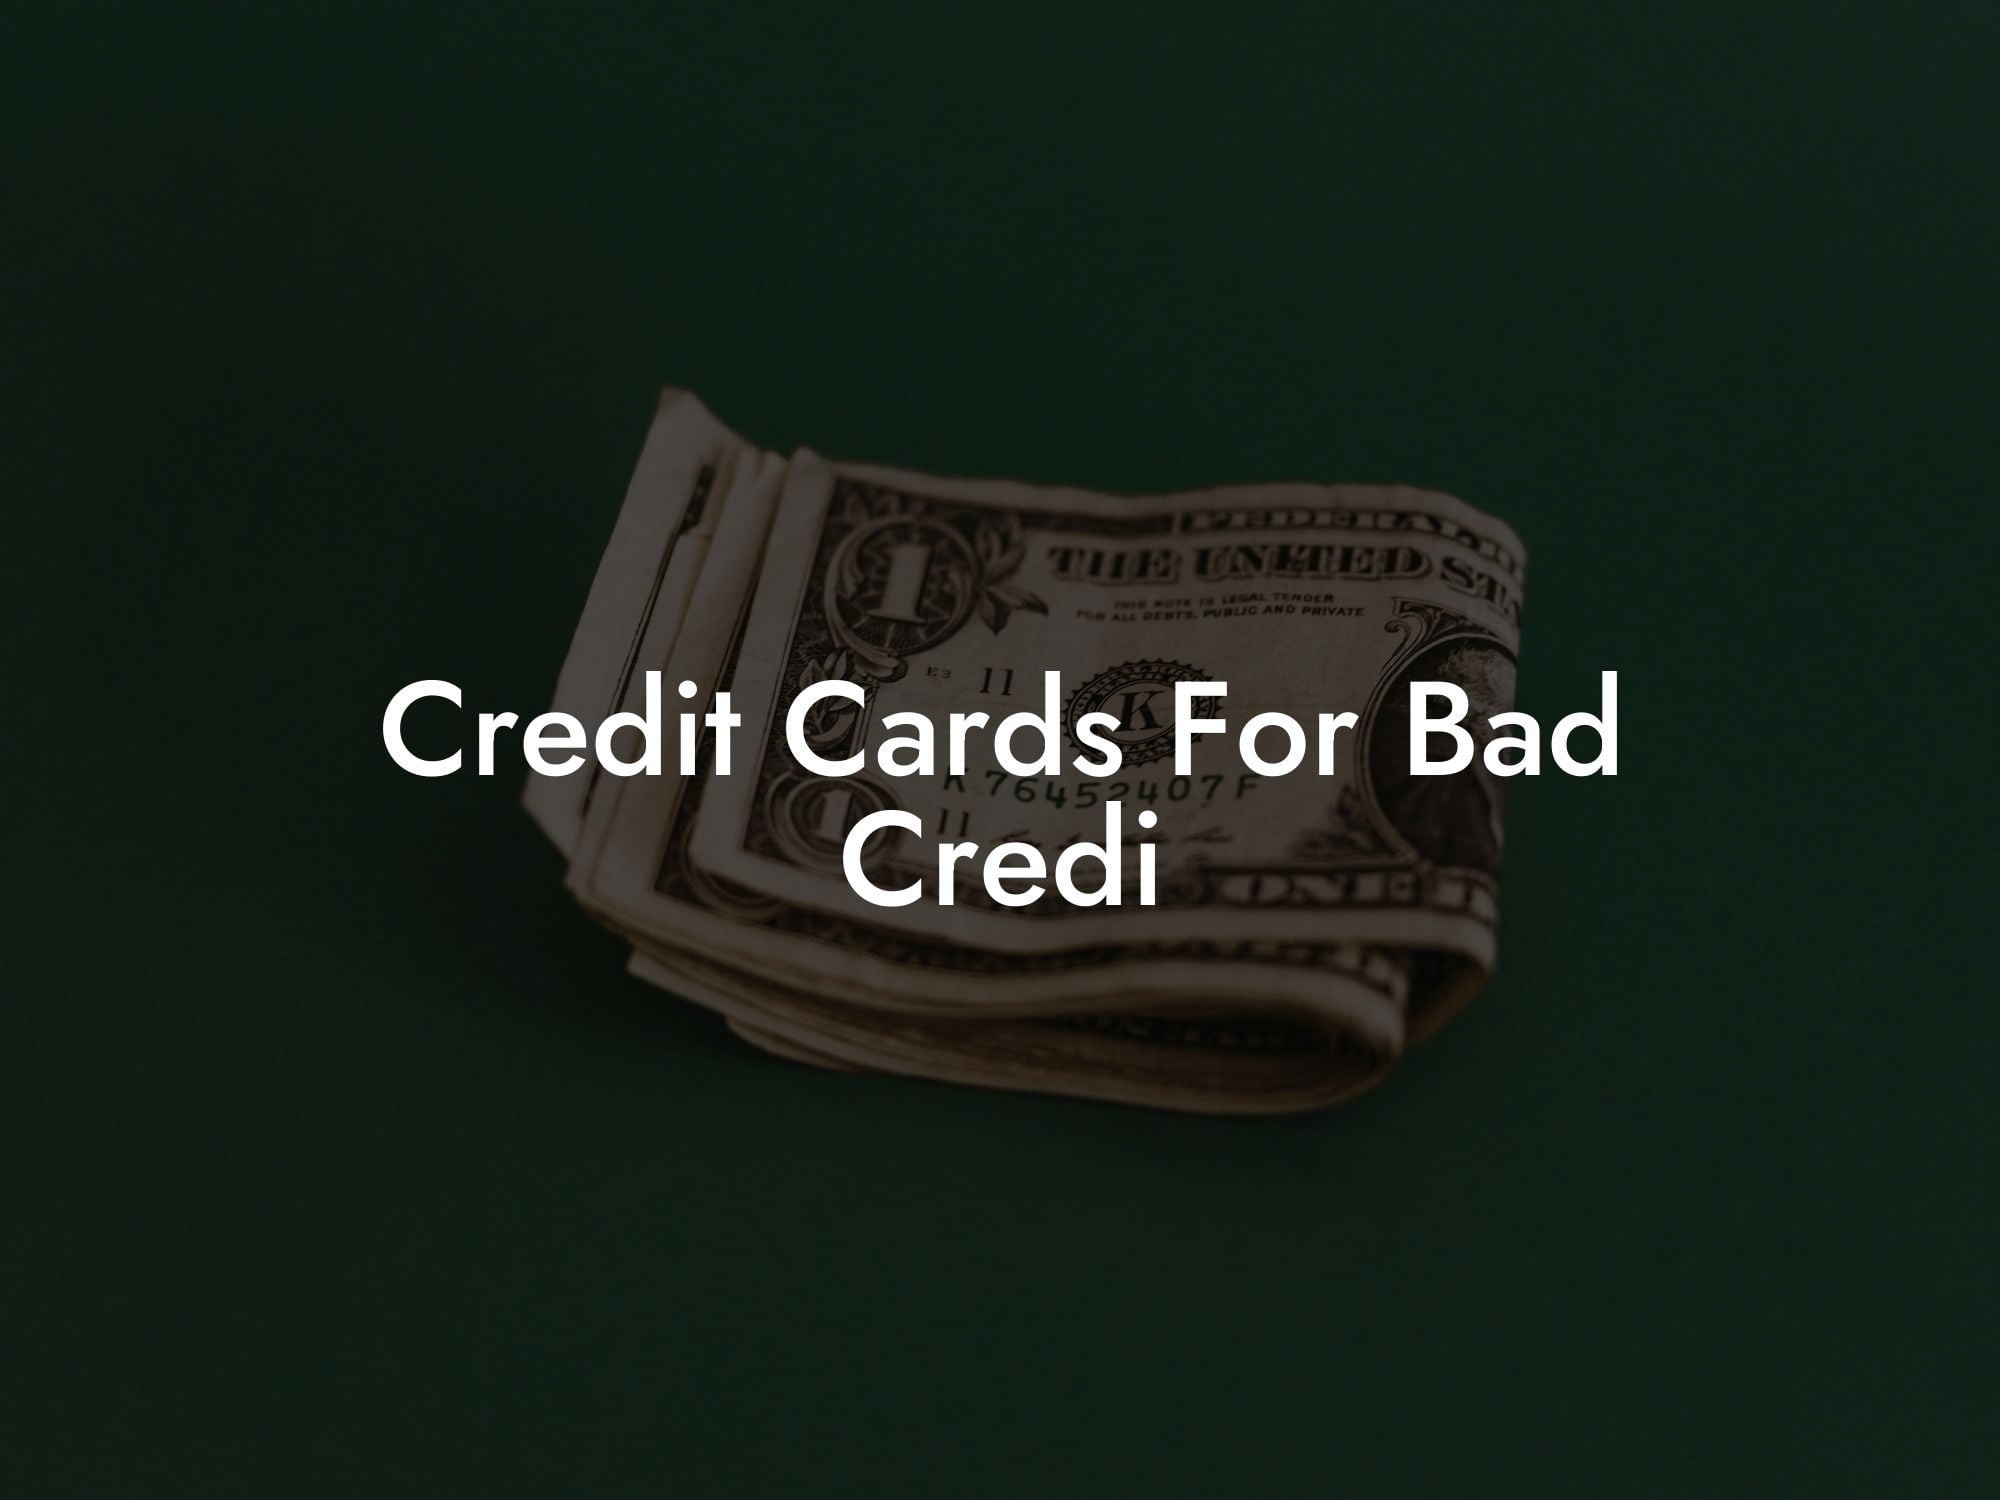 Credit Cards For Bad Credi